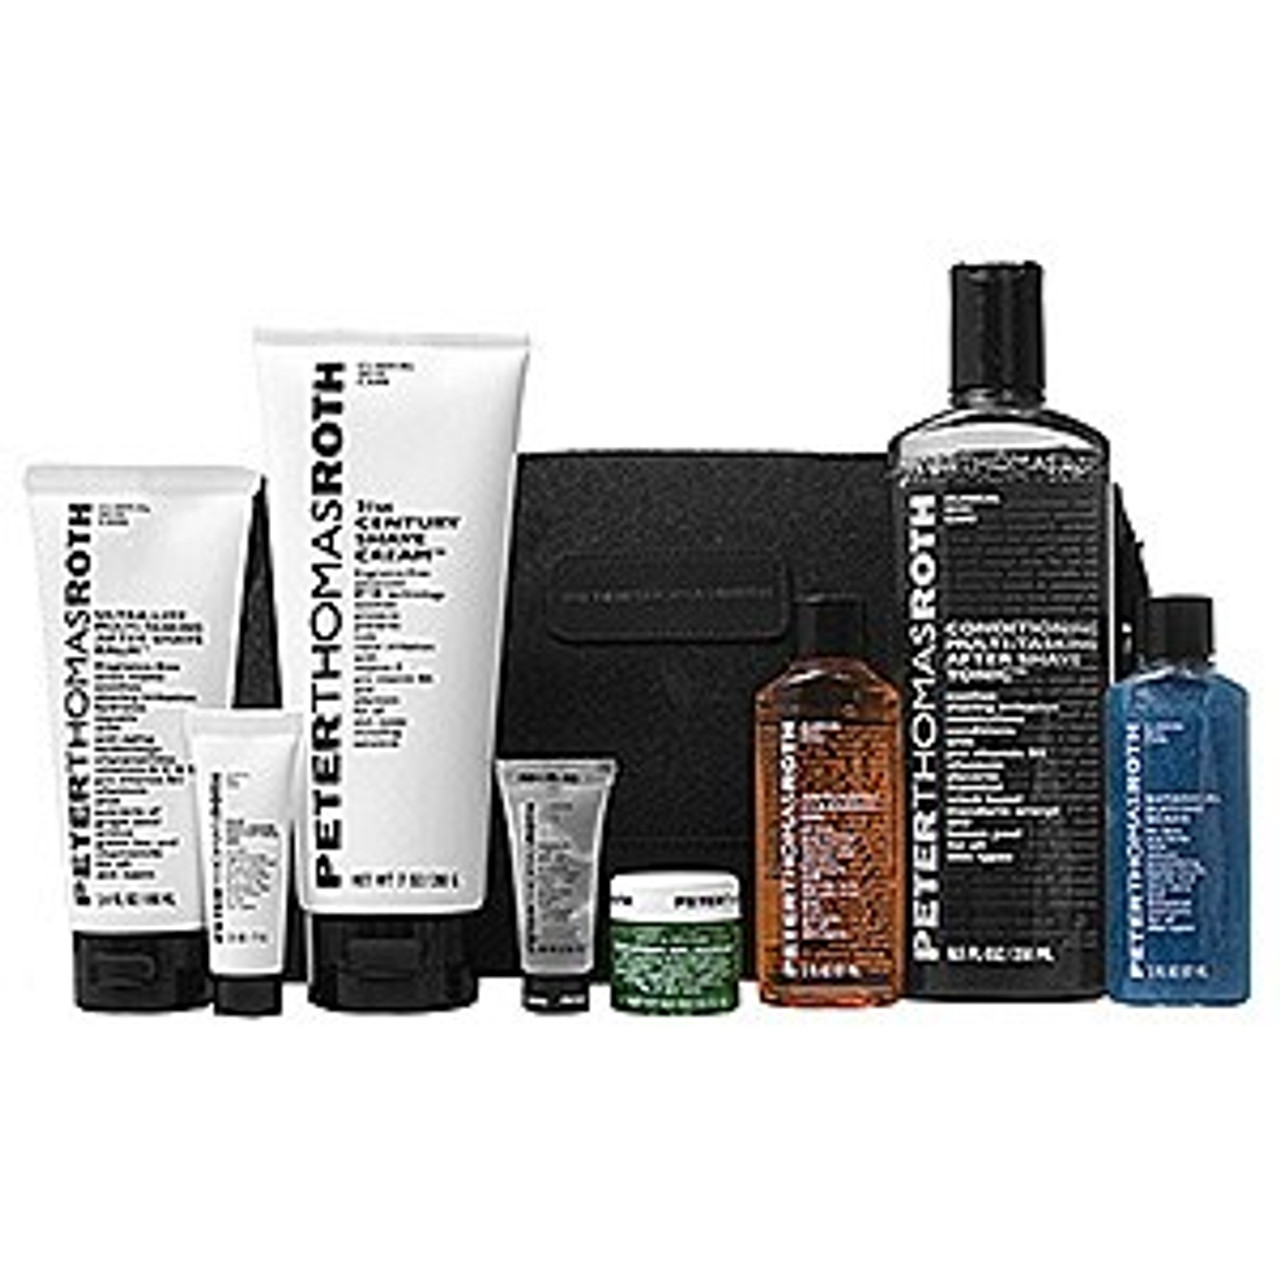 Peter Thomas Roth Ideal Shave Kit